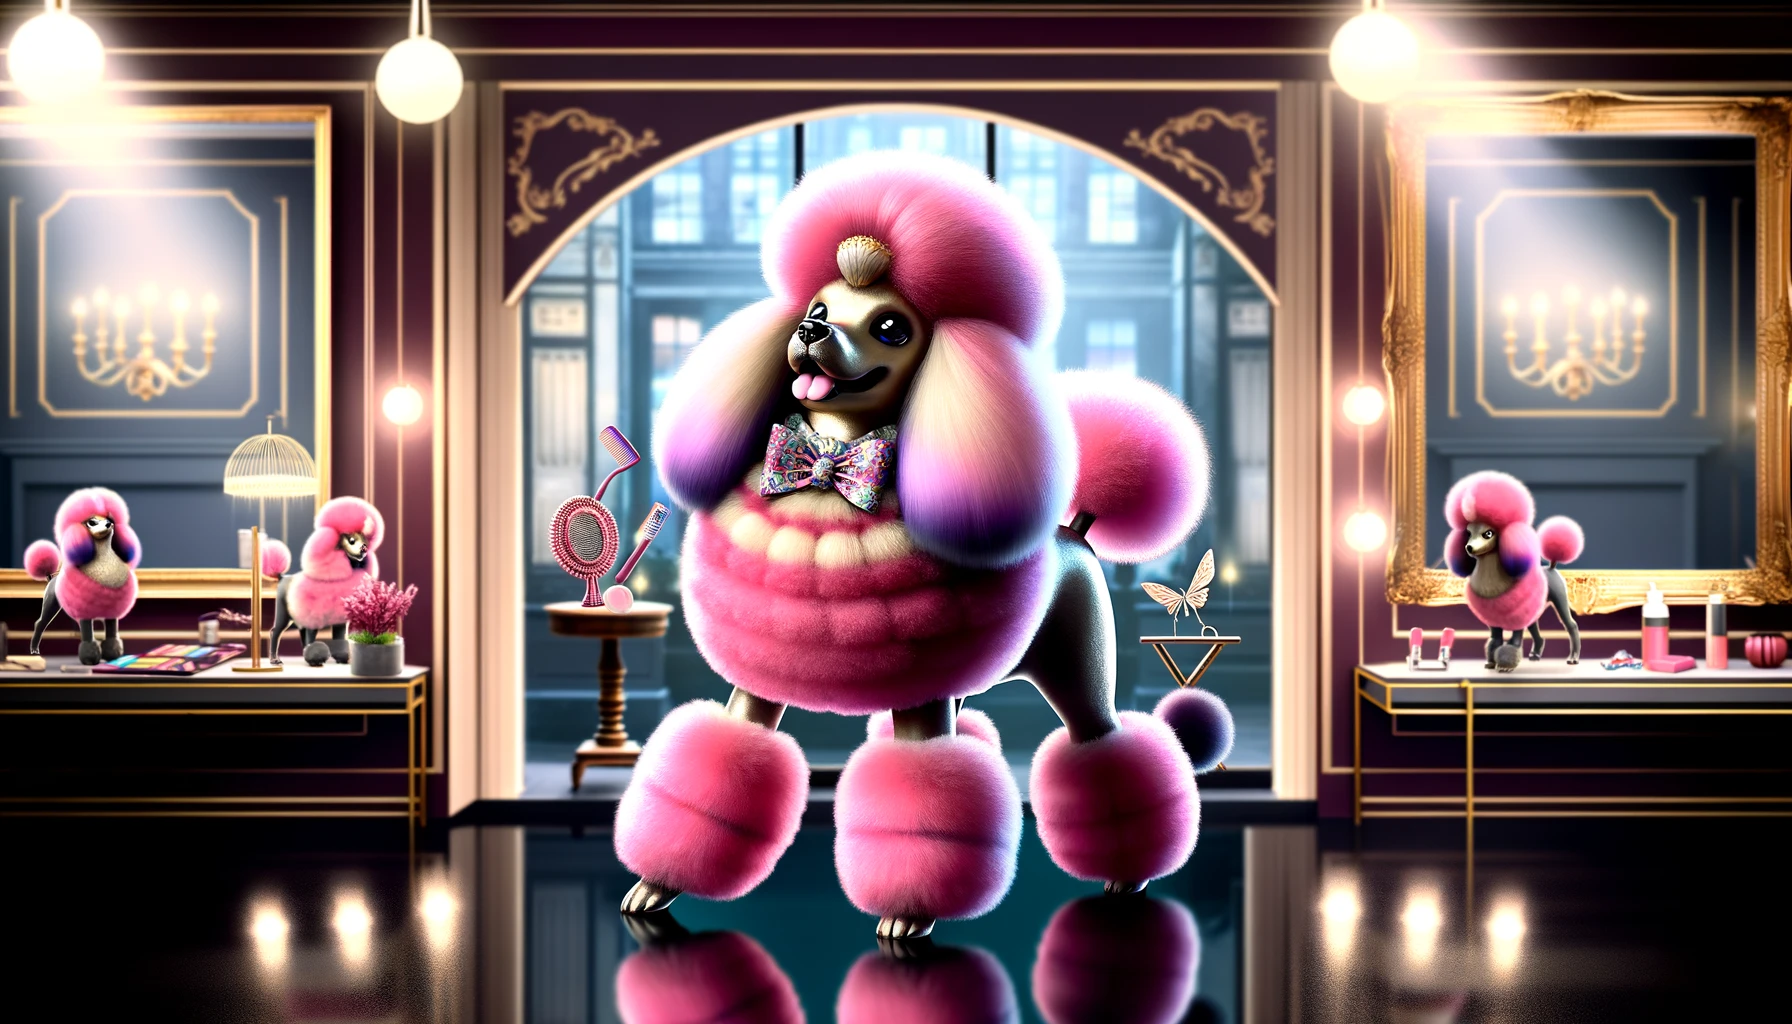 An artistic depiction of the shiny version of a fictional poodle-like Pokémon, resembling Furfrou, named Trimmian. This creature has a luxurious, bright pink fur coat styled in an extravagant, elaborate trim, featuring puffy segments and intricate patterns. It stands elegantly in a posh salon setting, with stylish decor and grooming tools displayed. The background includes a large mirror reflecting the sophisticated appearance of Trimmian, under soft, glamorous lighting that highlights its unique and stylish look.